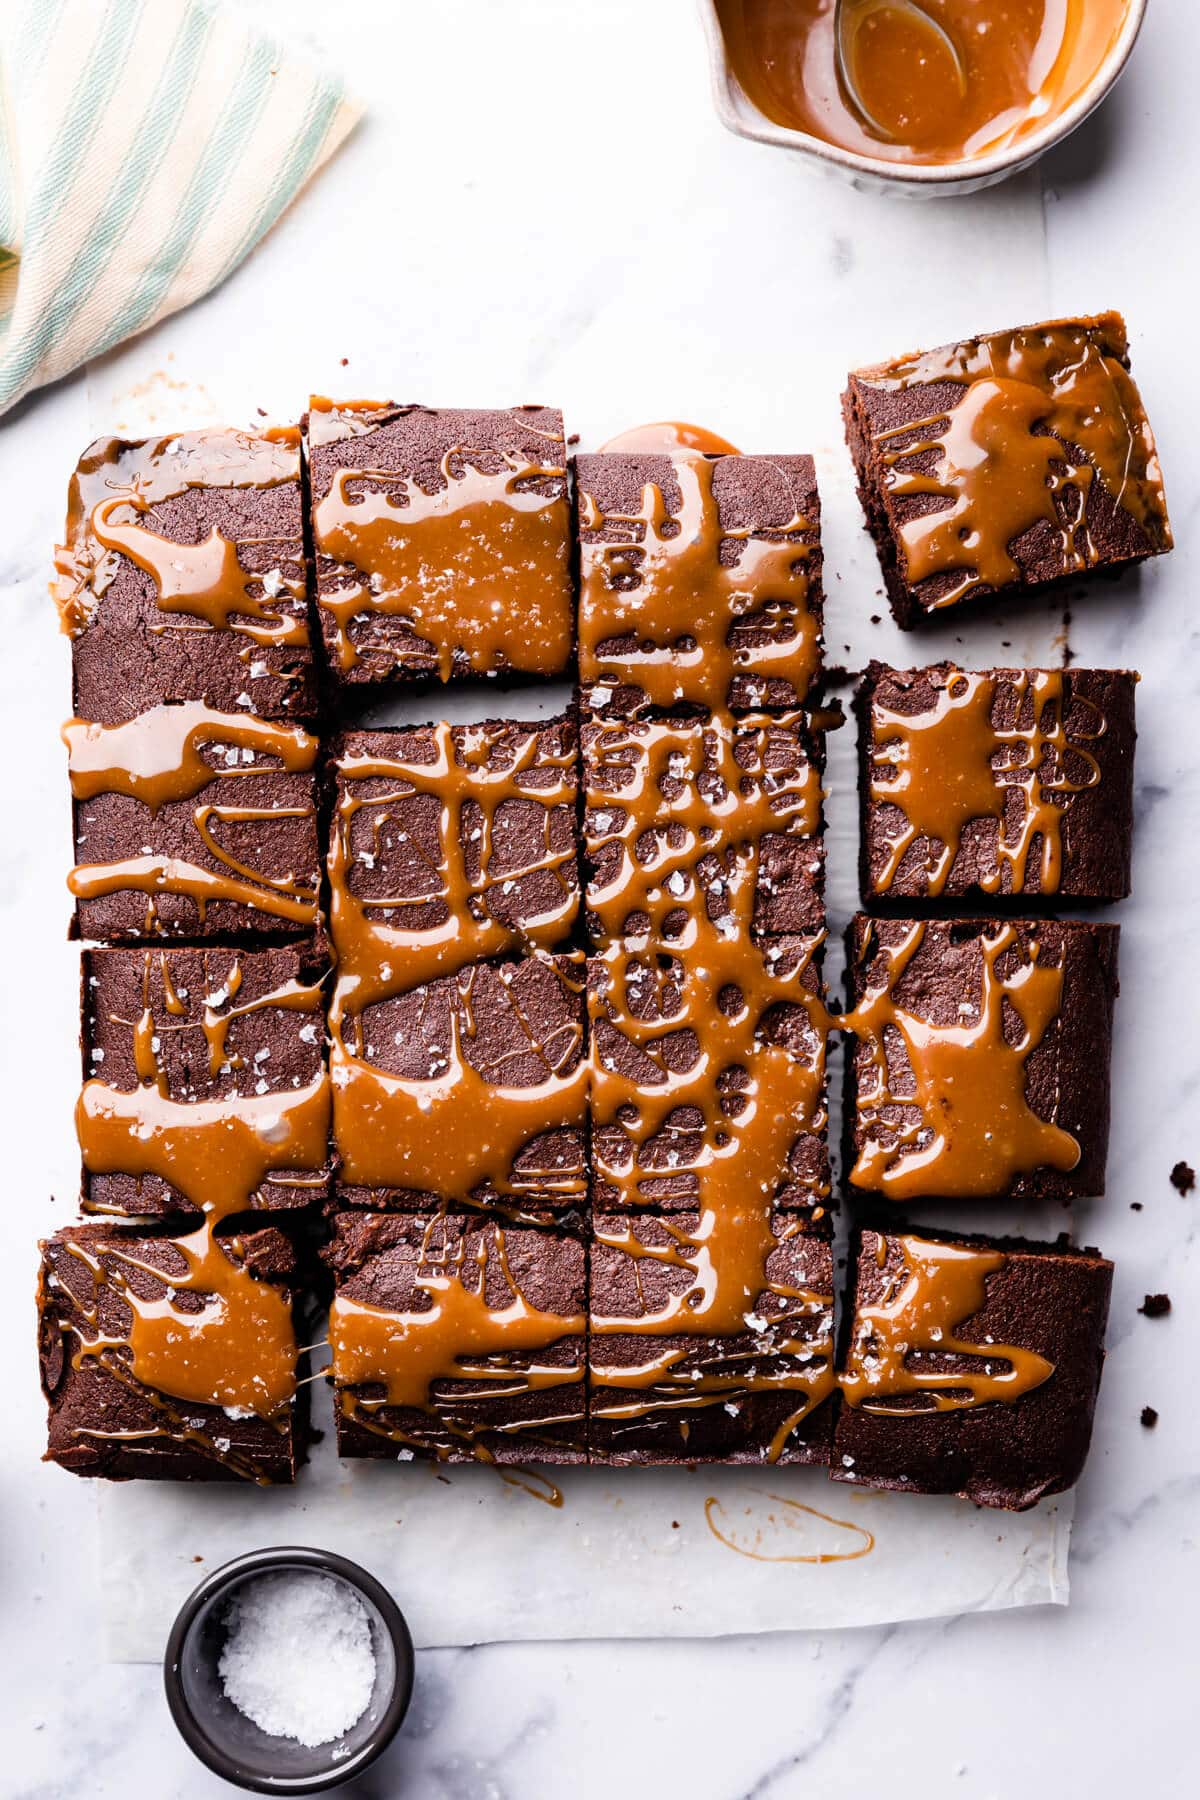 chocolate stout brownie cut into 16 squares and drizzled with caramel.